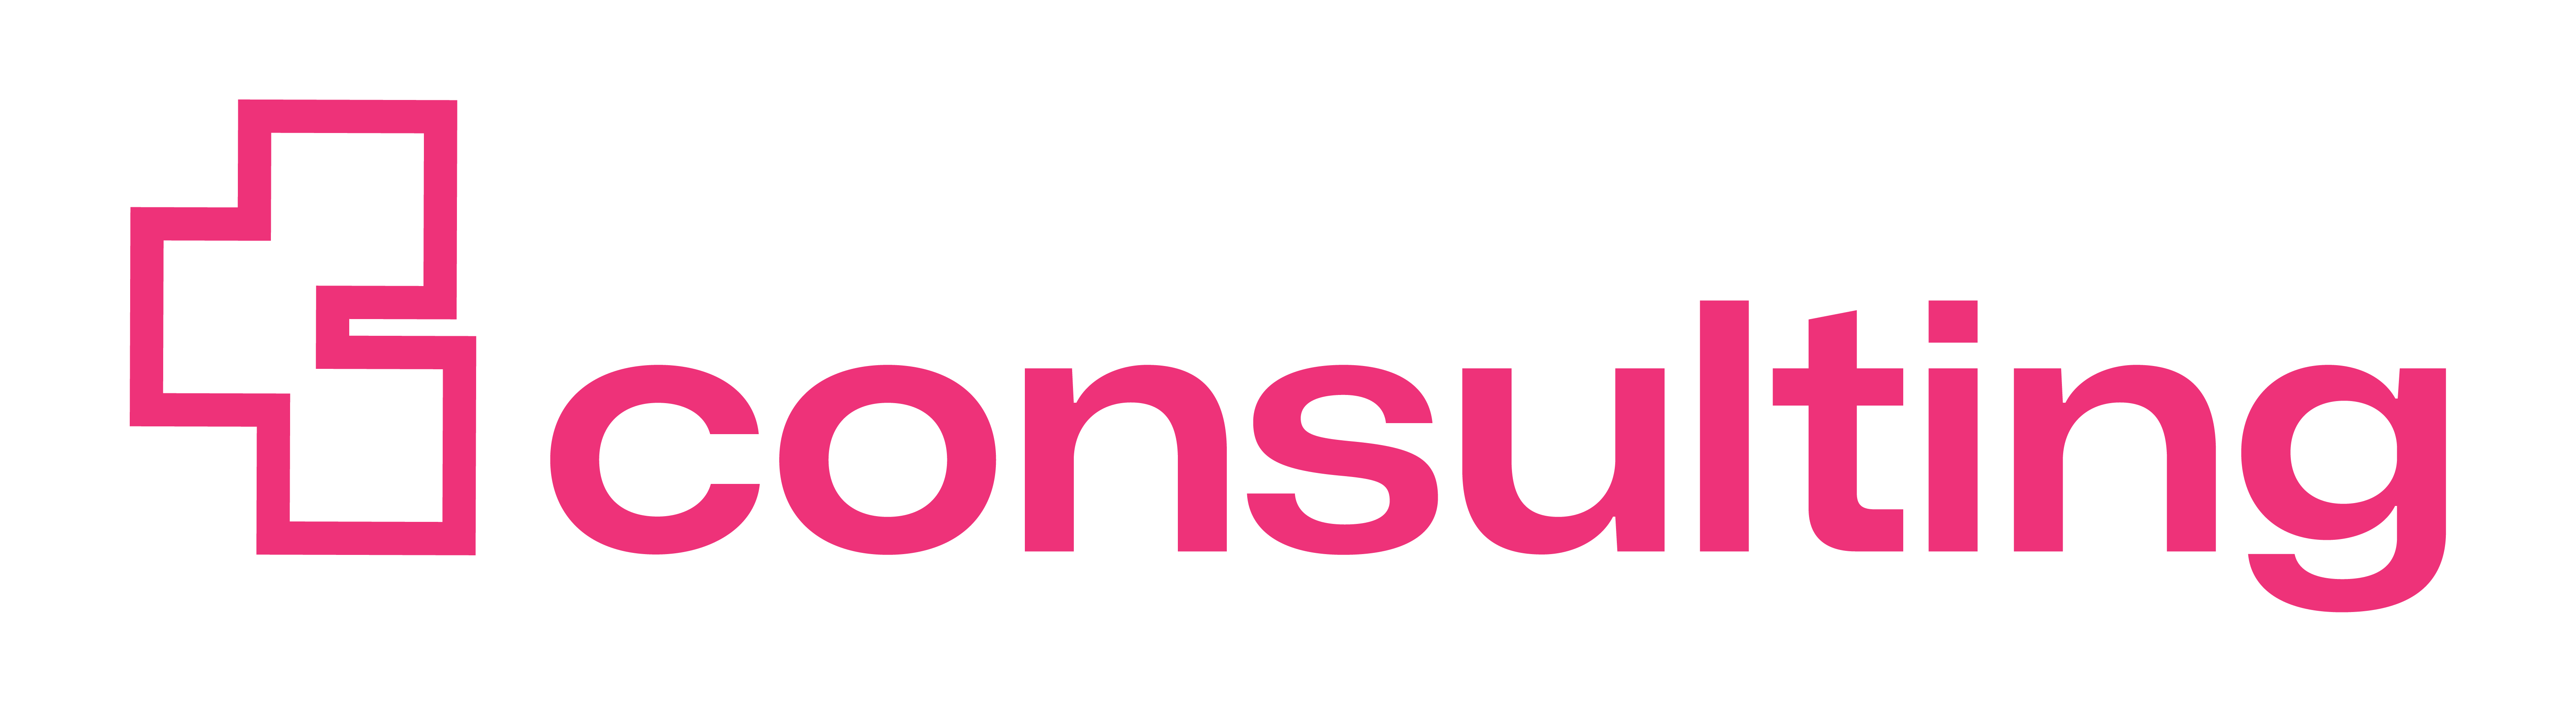 Talent Consulting